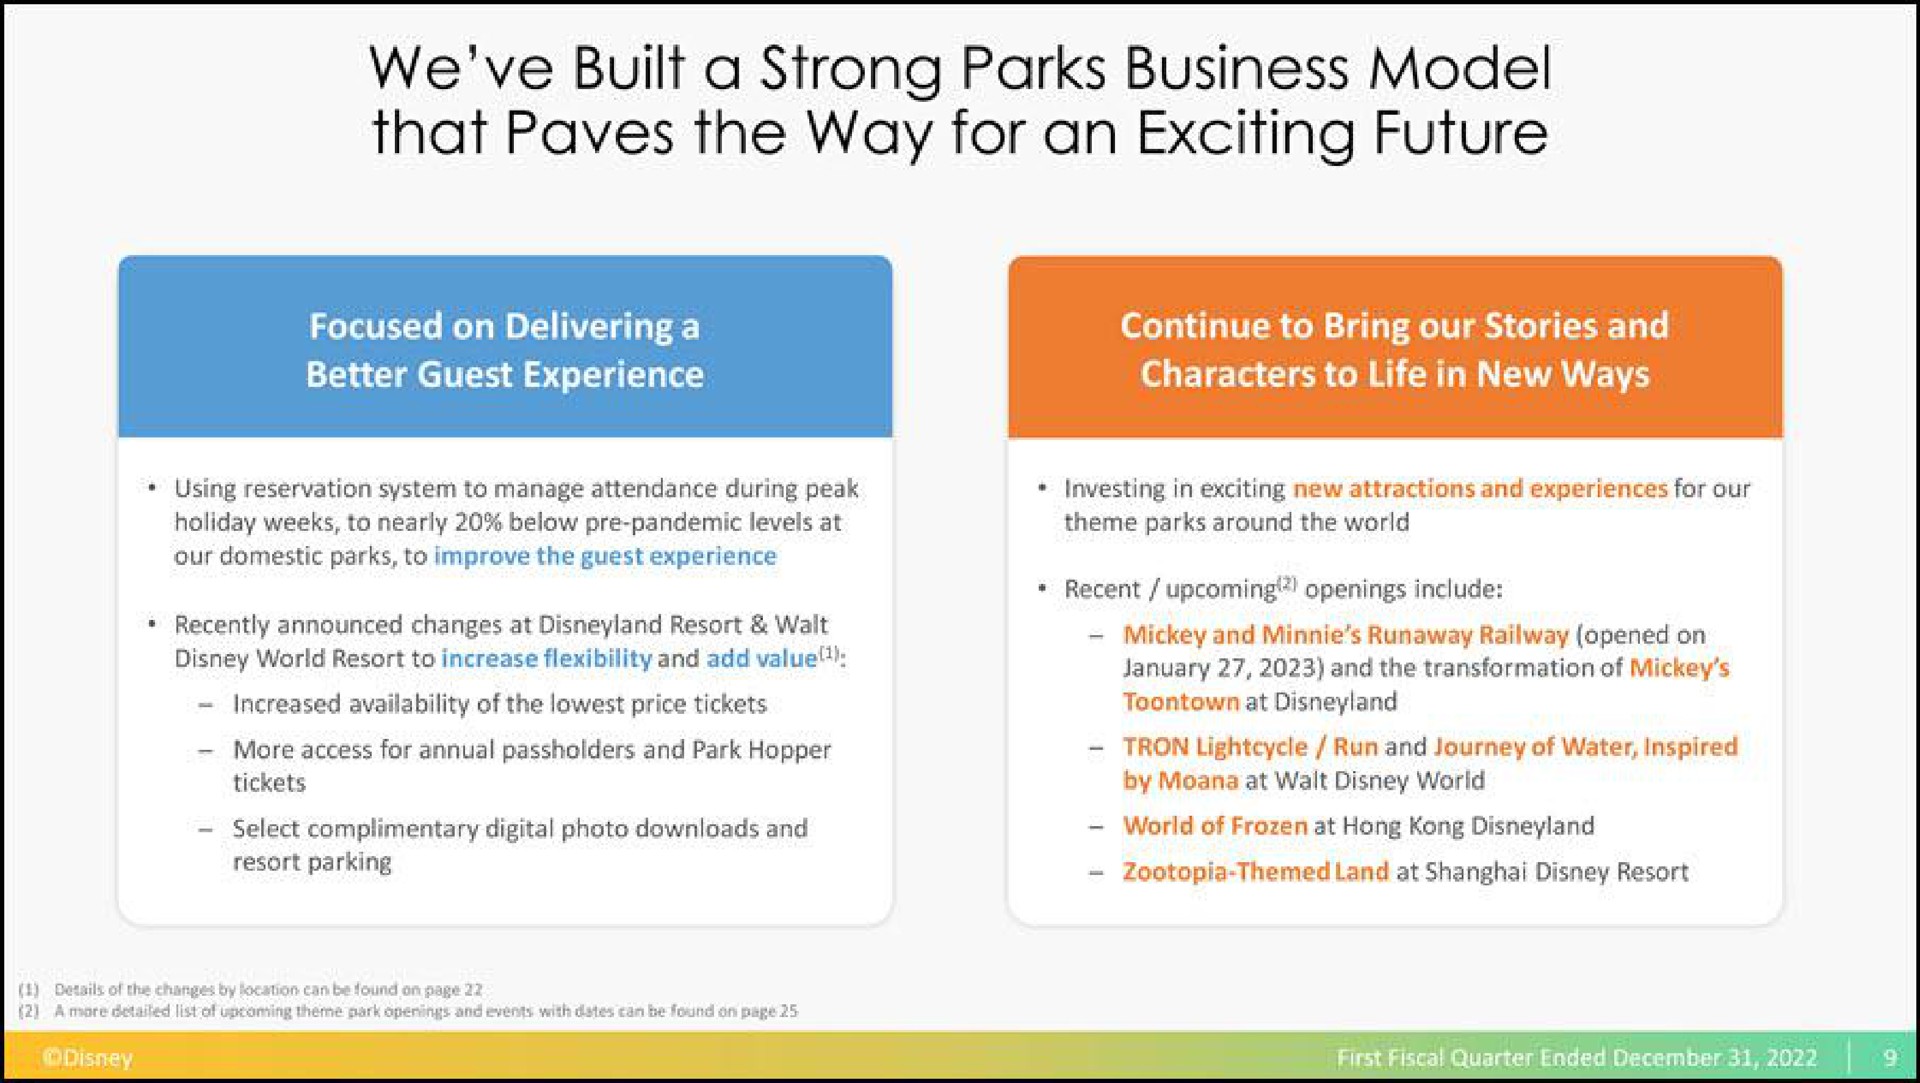 we built a strong parks business model that paves the way for an exciting future | Disney